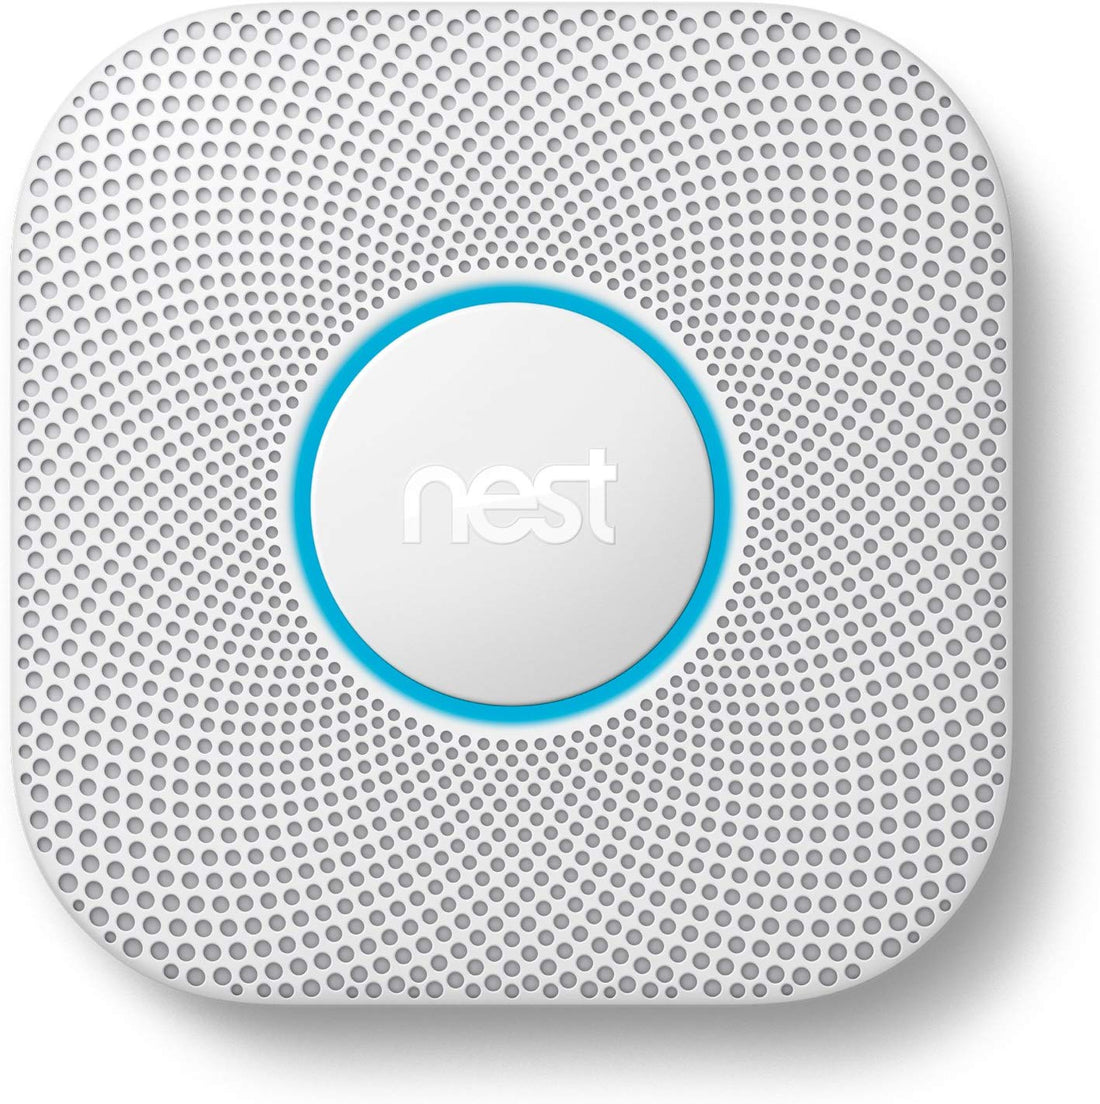 Nest Protect Smoke and Carbon Monoxide Alarm (2nd Generation) - White (Certified Refurbished)